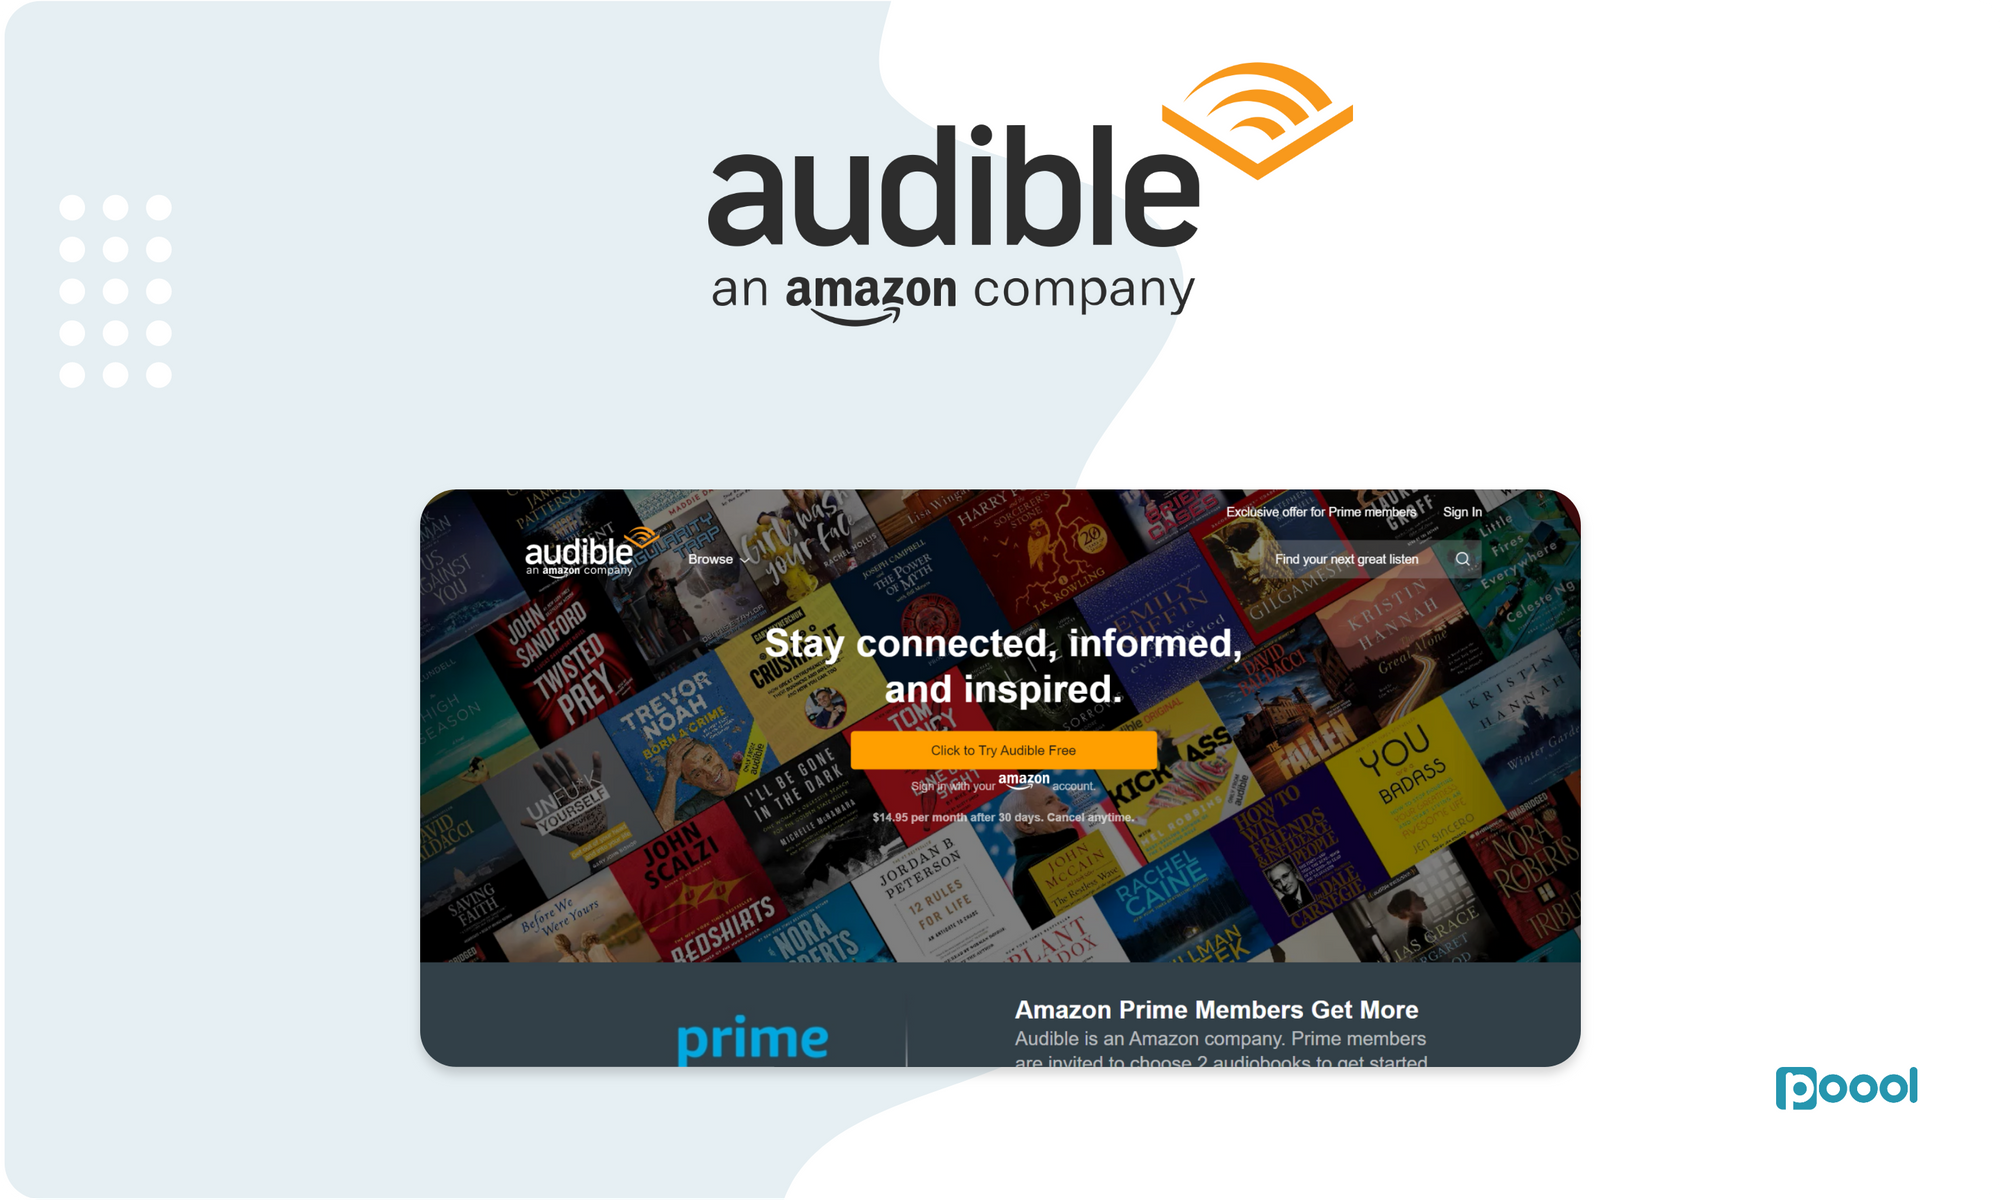 Audible Paywall: From Content, to Subscription to Content | Series.